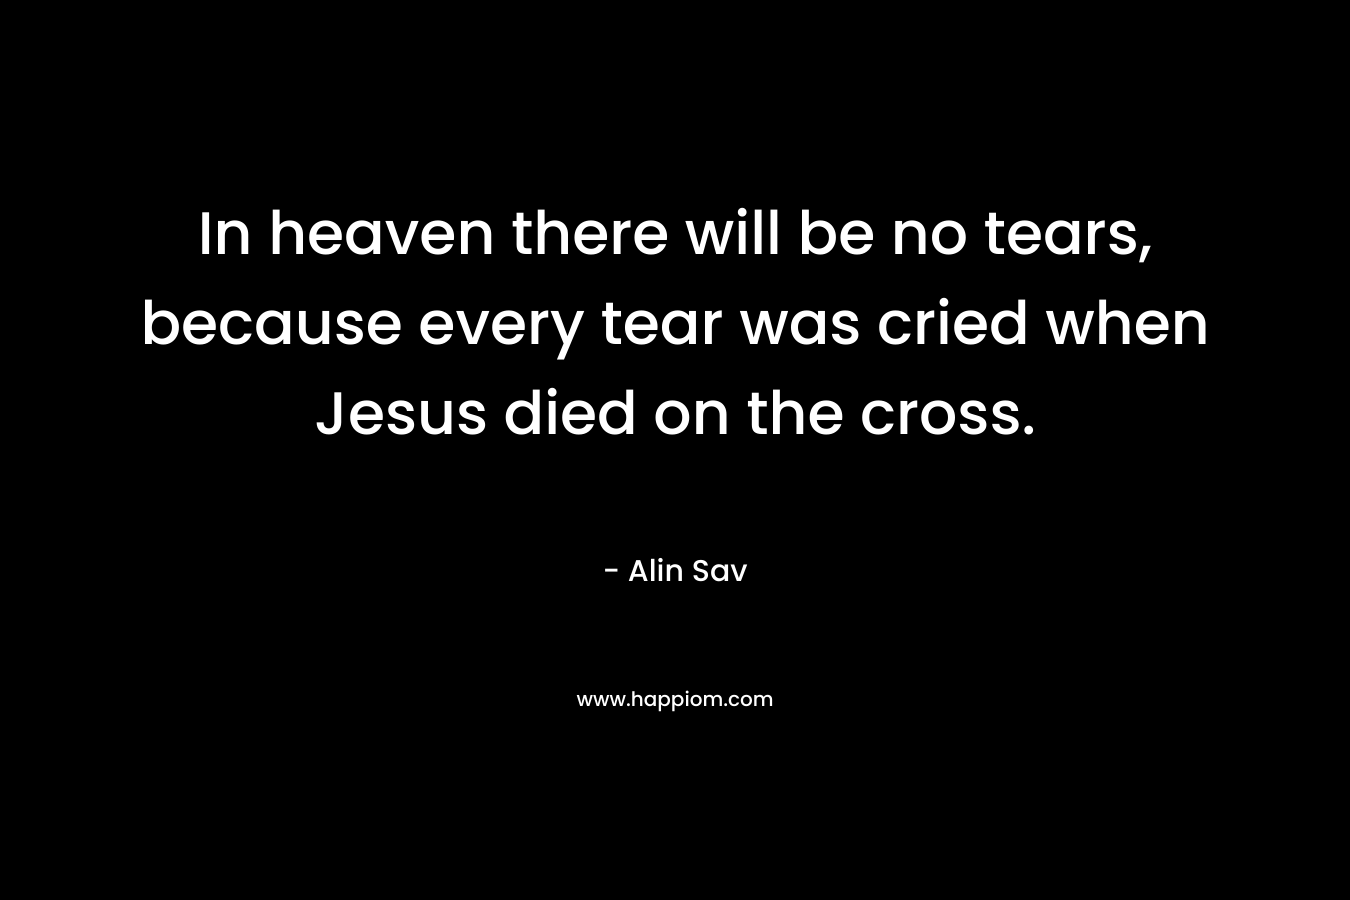 In heaven there will be no tears, because every tear was cried when Jesus died on the cross.